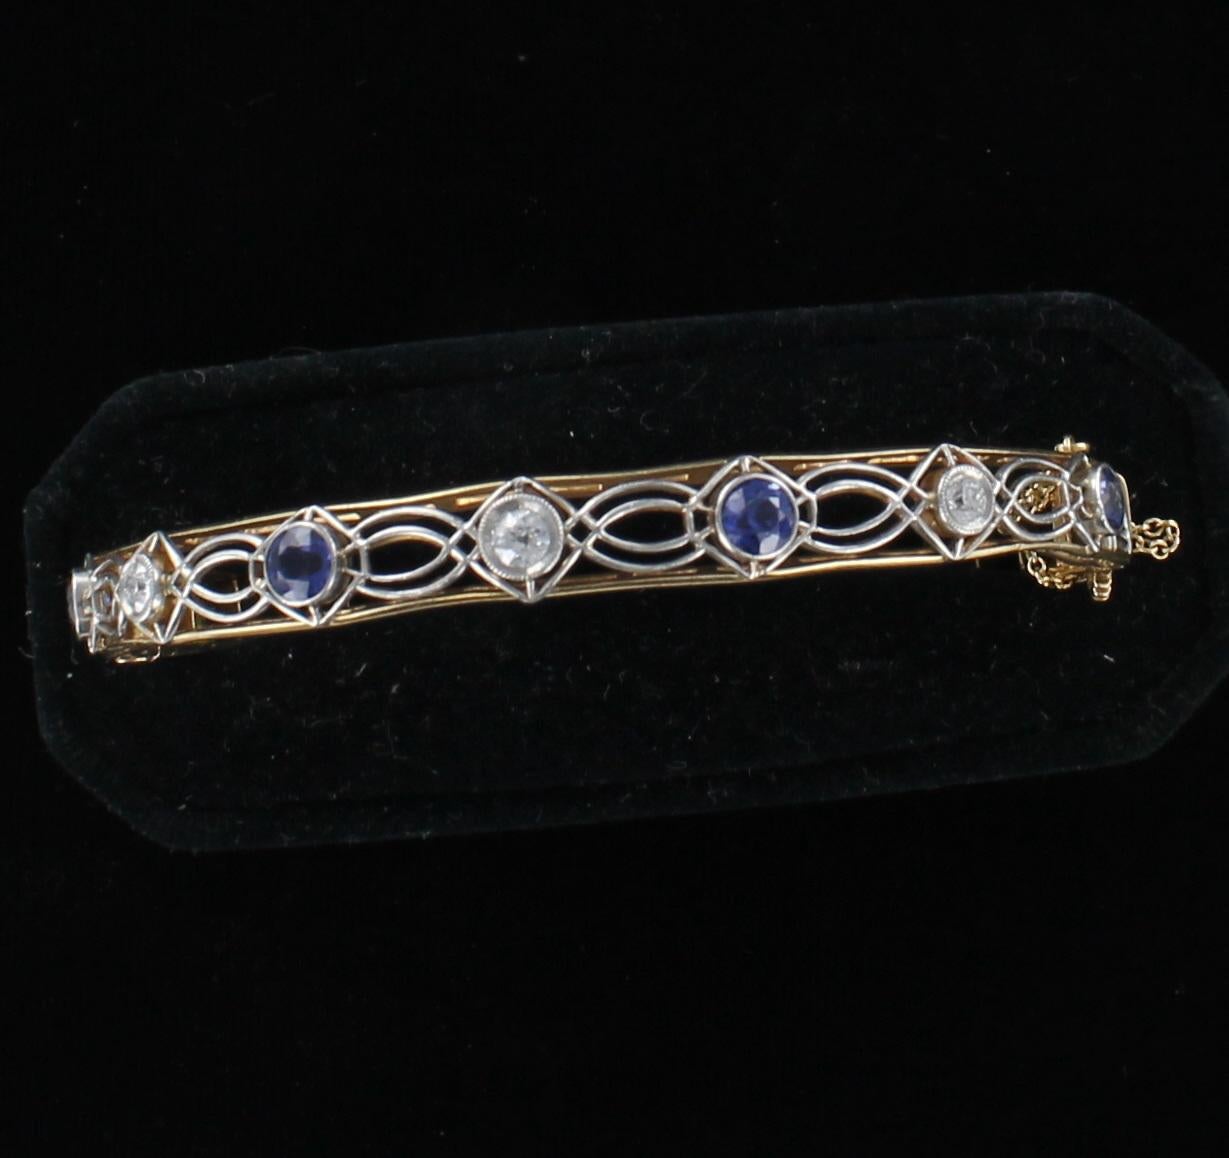 This openwork yellow gold and platinum bracelet is an heirloom treasure.  Four sapphires and three diamonds are bezel-set and alternate across the top of the bangle.  This lovely Art Deco bracelet is representative of the beauty and artisanship of